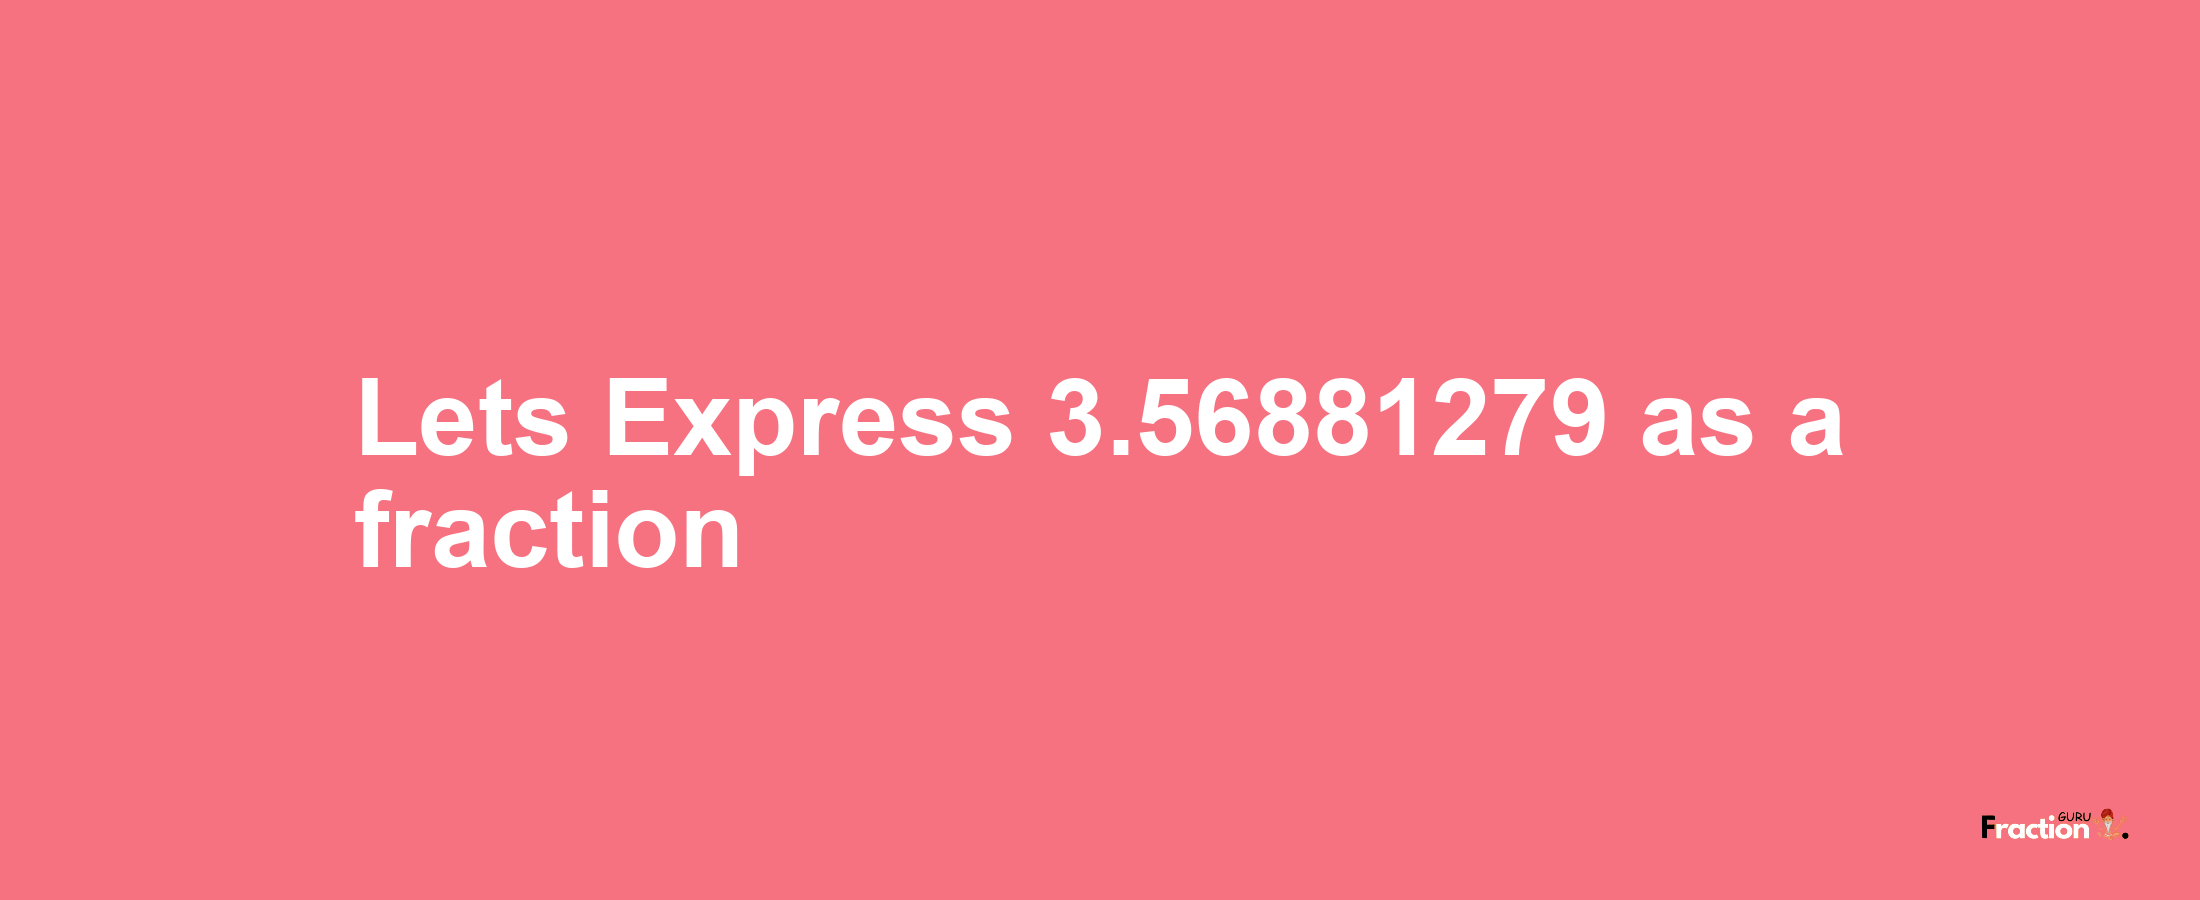 Lets Express 3.56881279 as afraction